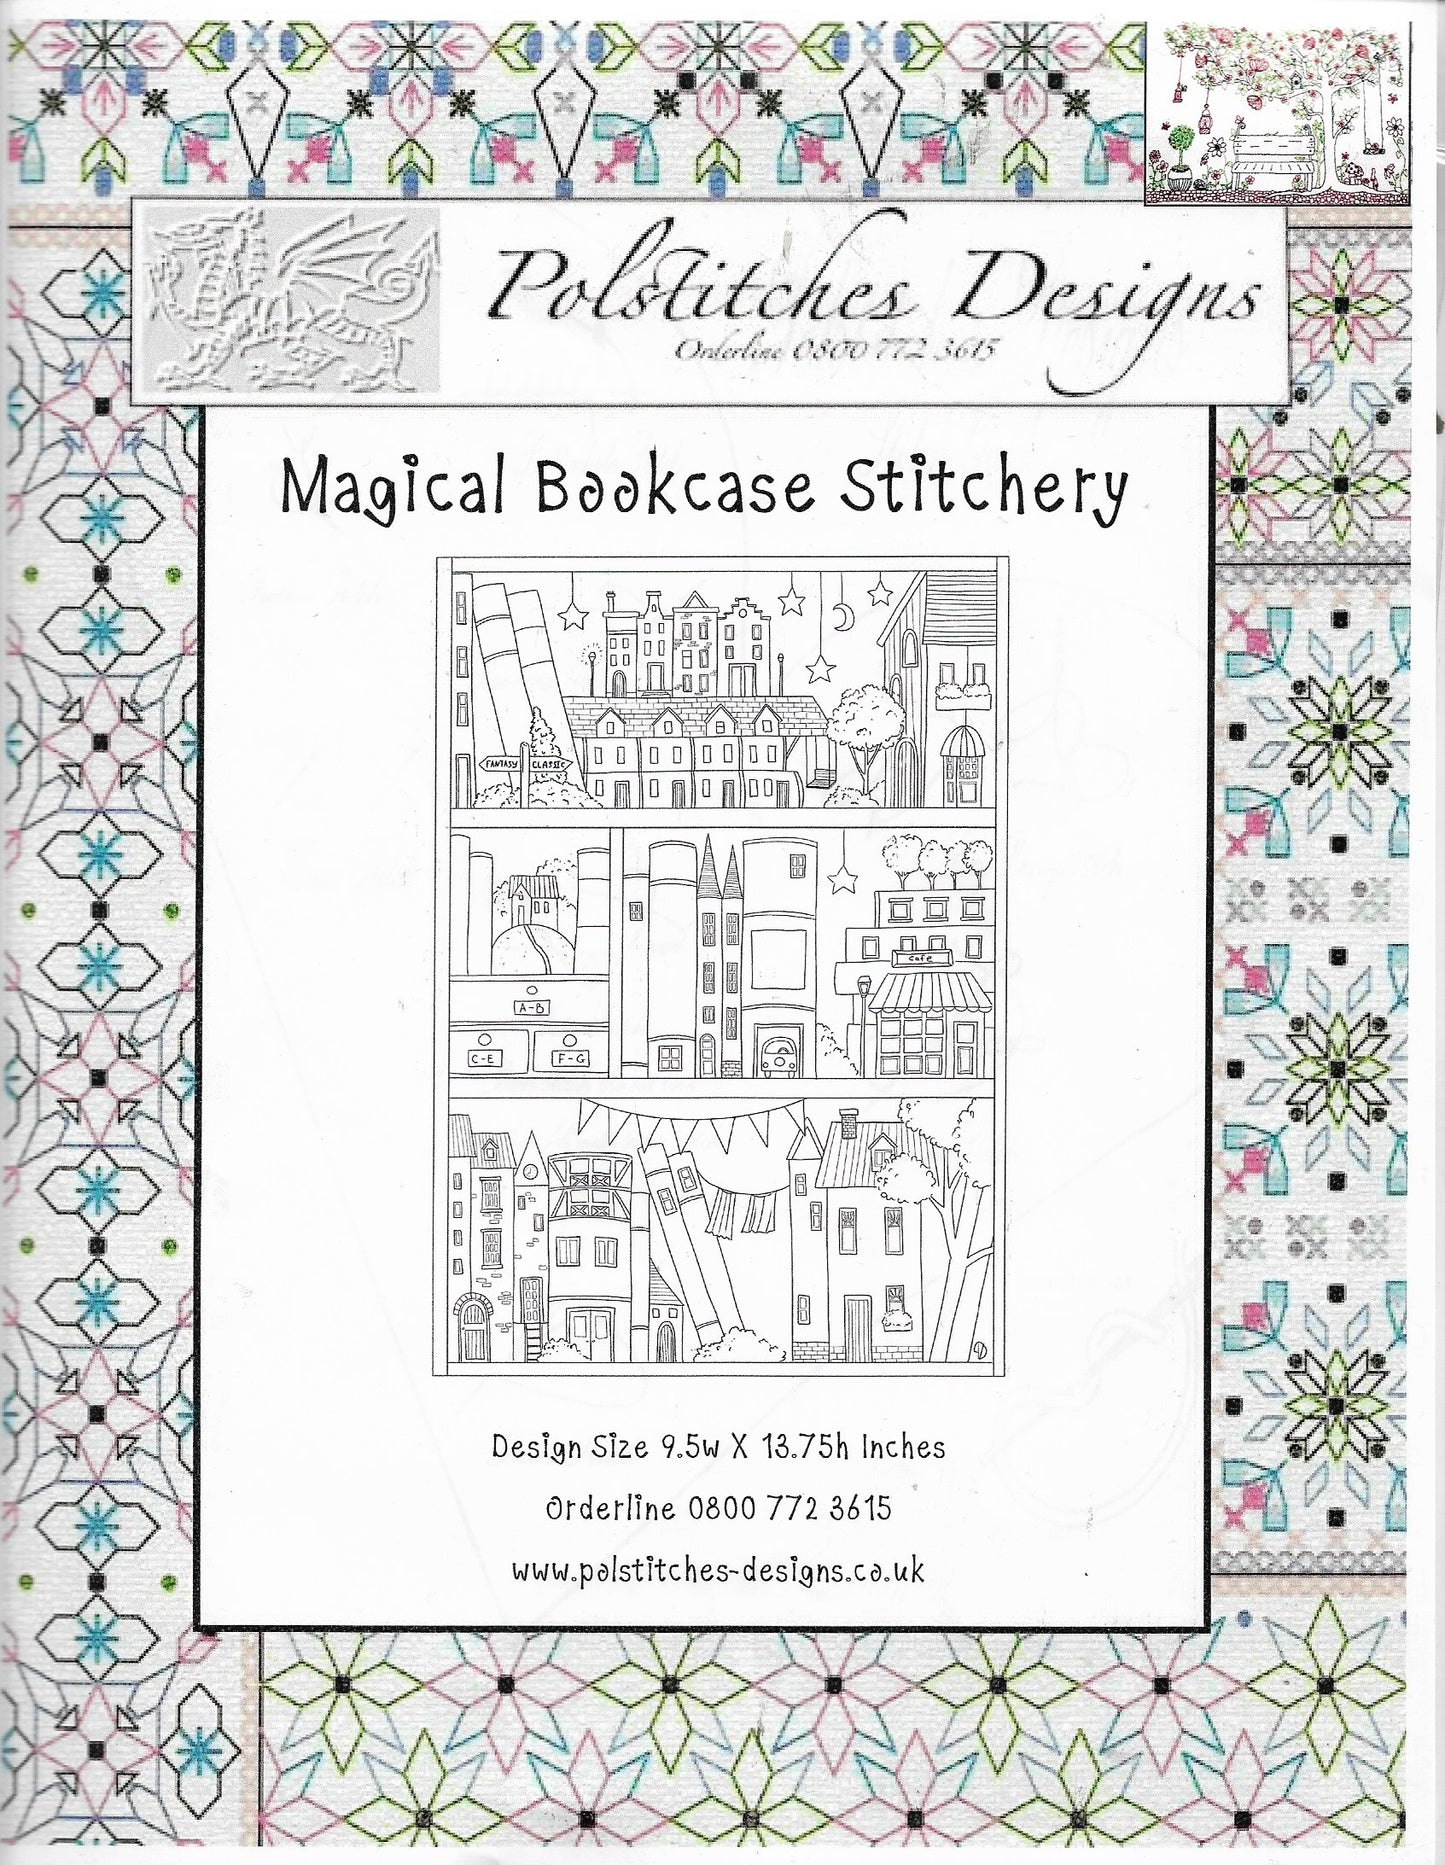 Polstitches Designs Magical Bookcase Stitchery Embroidery pattern